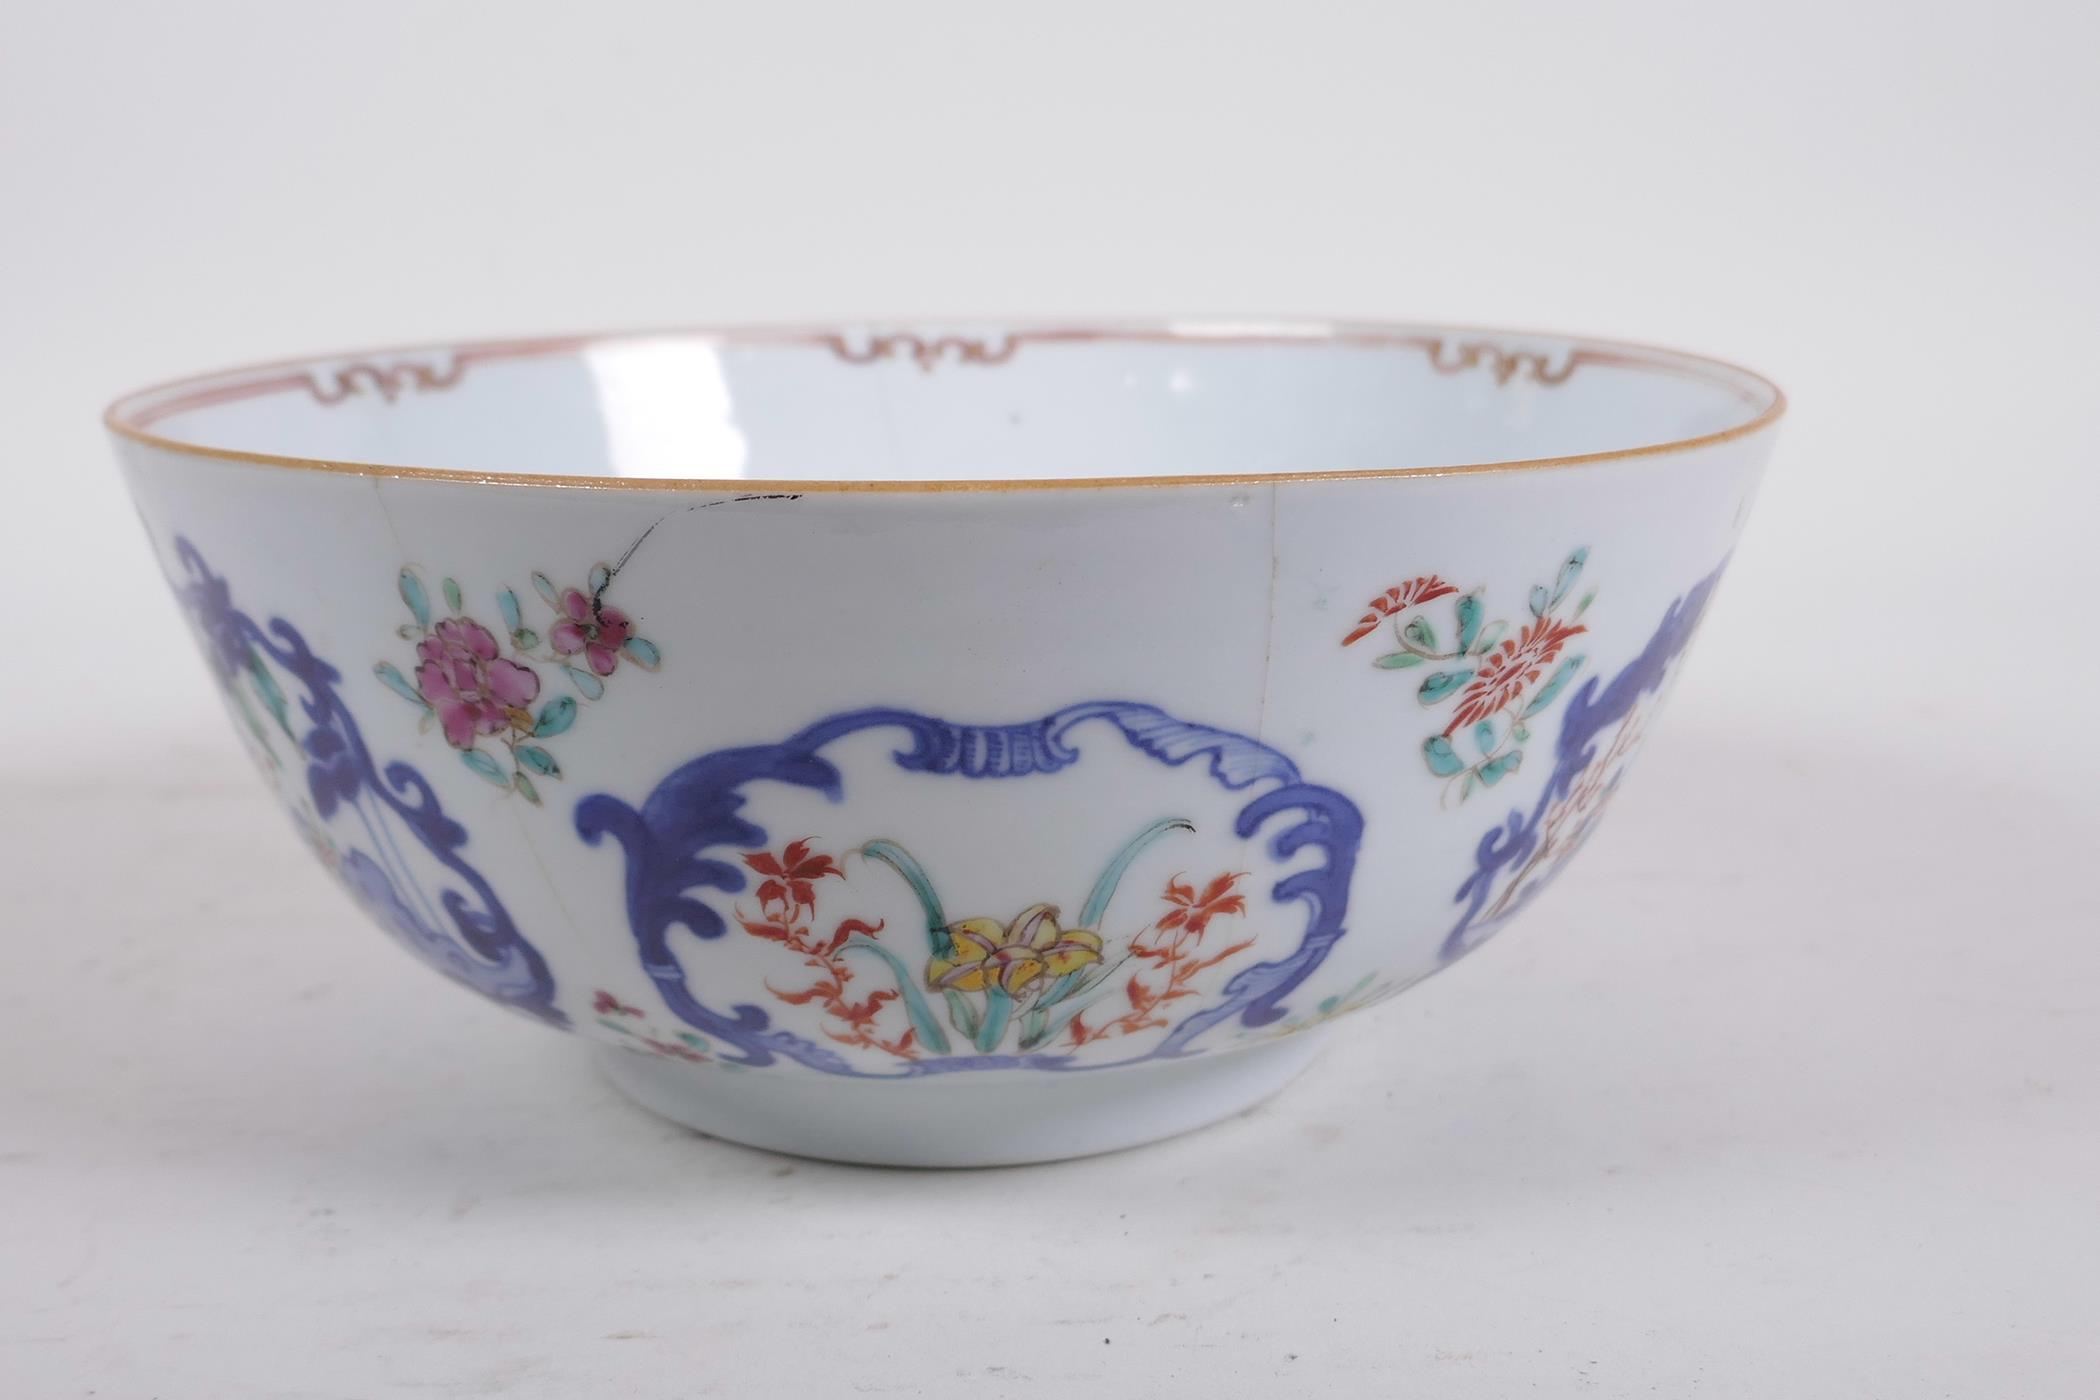 A C18th Chinese polychrome porcelain bowl decorated with figures in a landscape and flowers, 7½" - Image 4 of 8